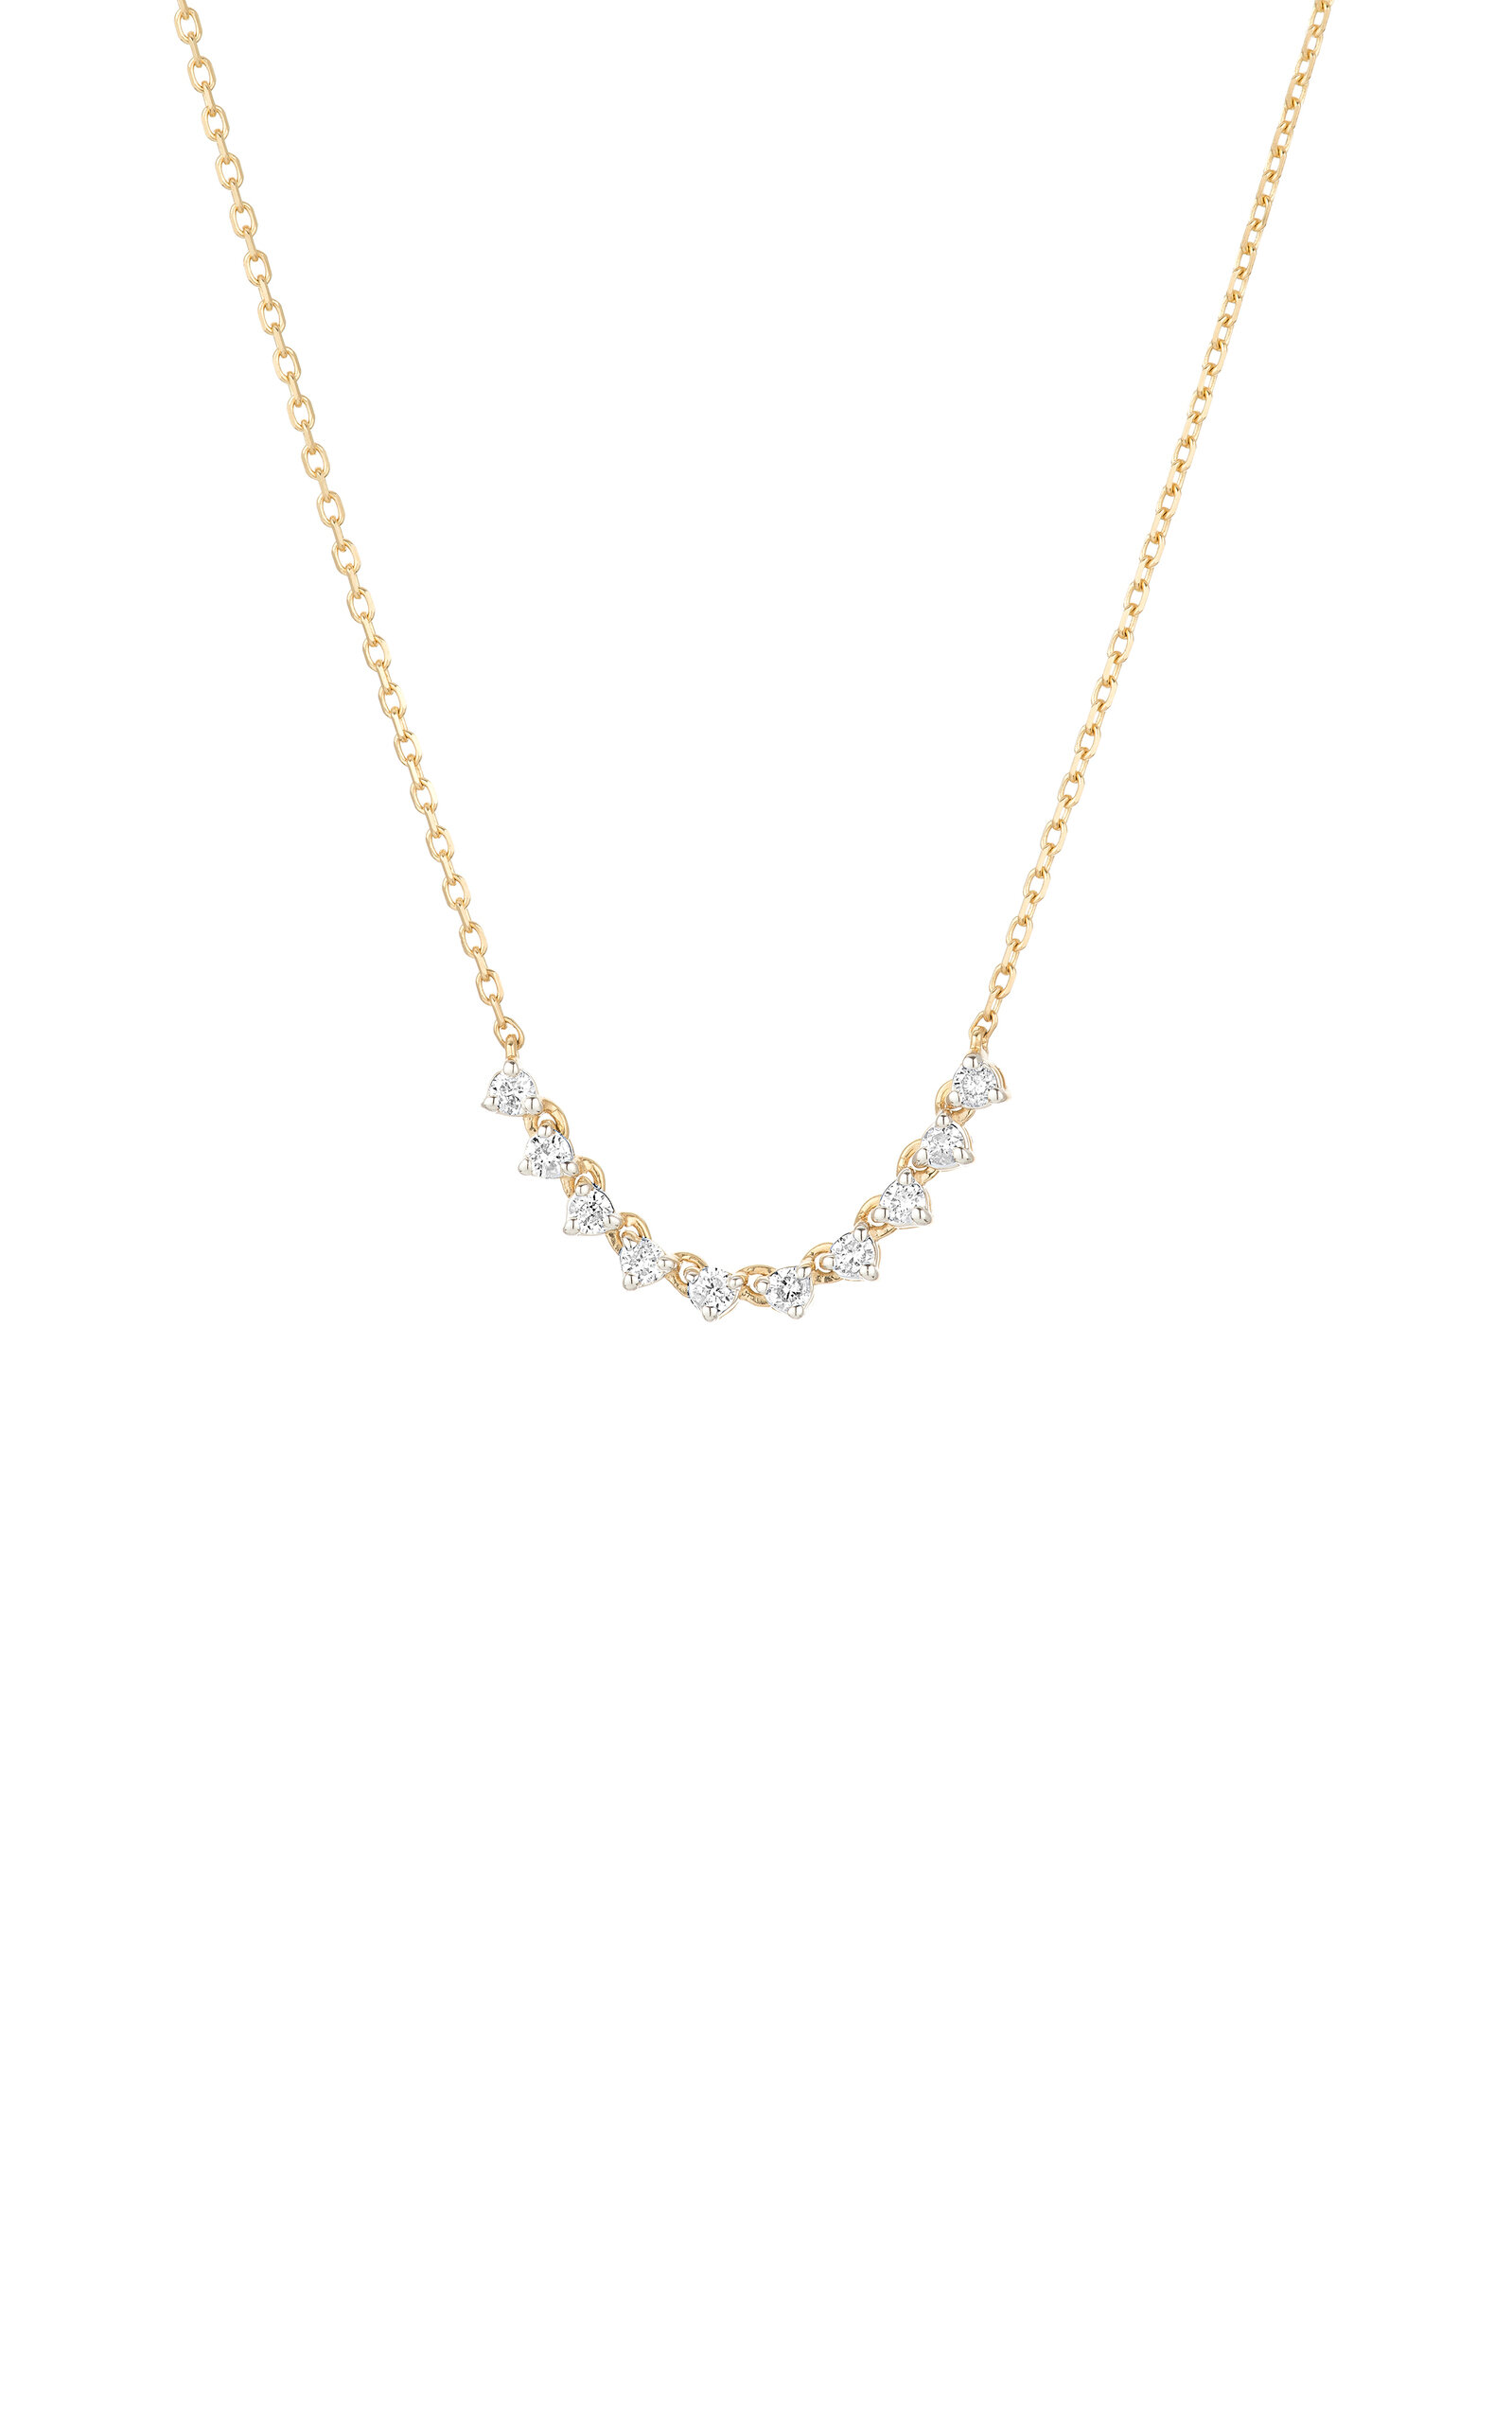 ADINA REYTER WOMEN'S 14K YELLOW GOLD AND DIAMOND ROUNDS CHAIN NECKLACE